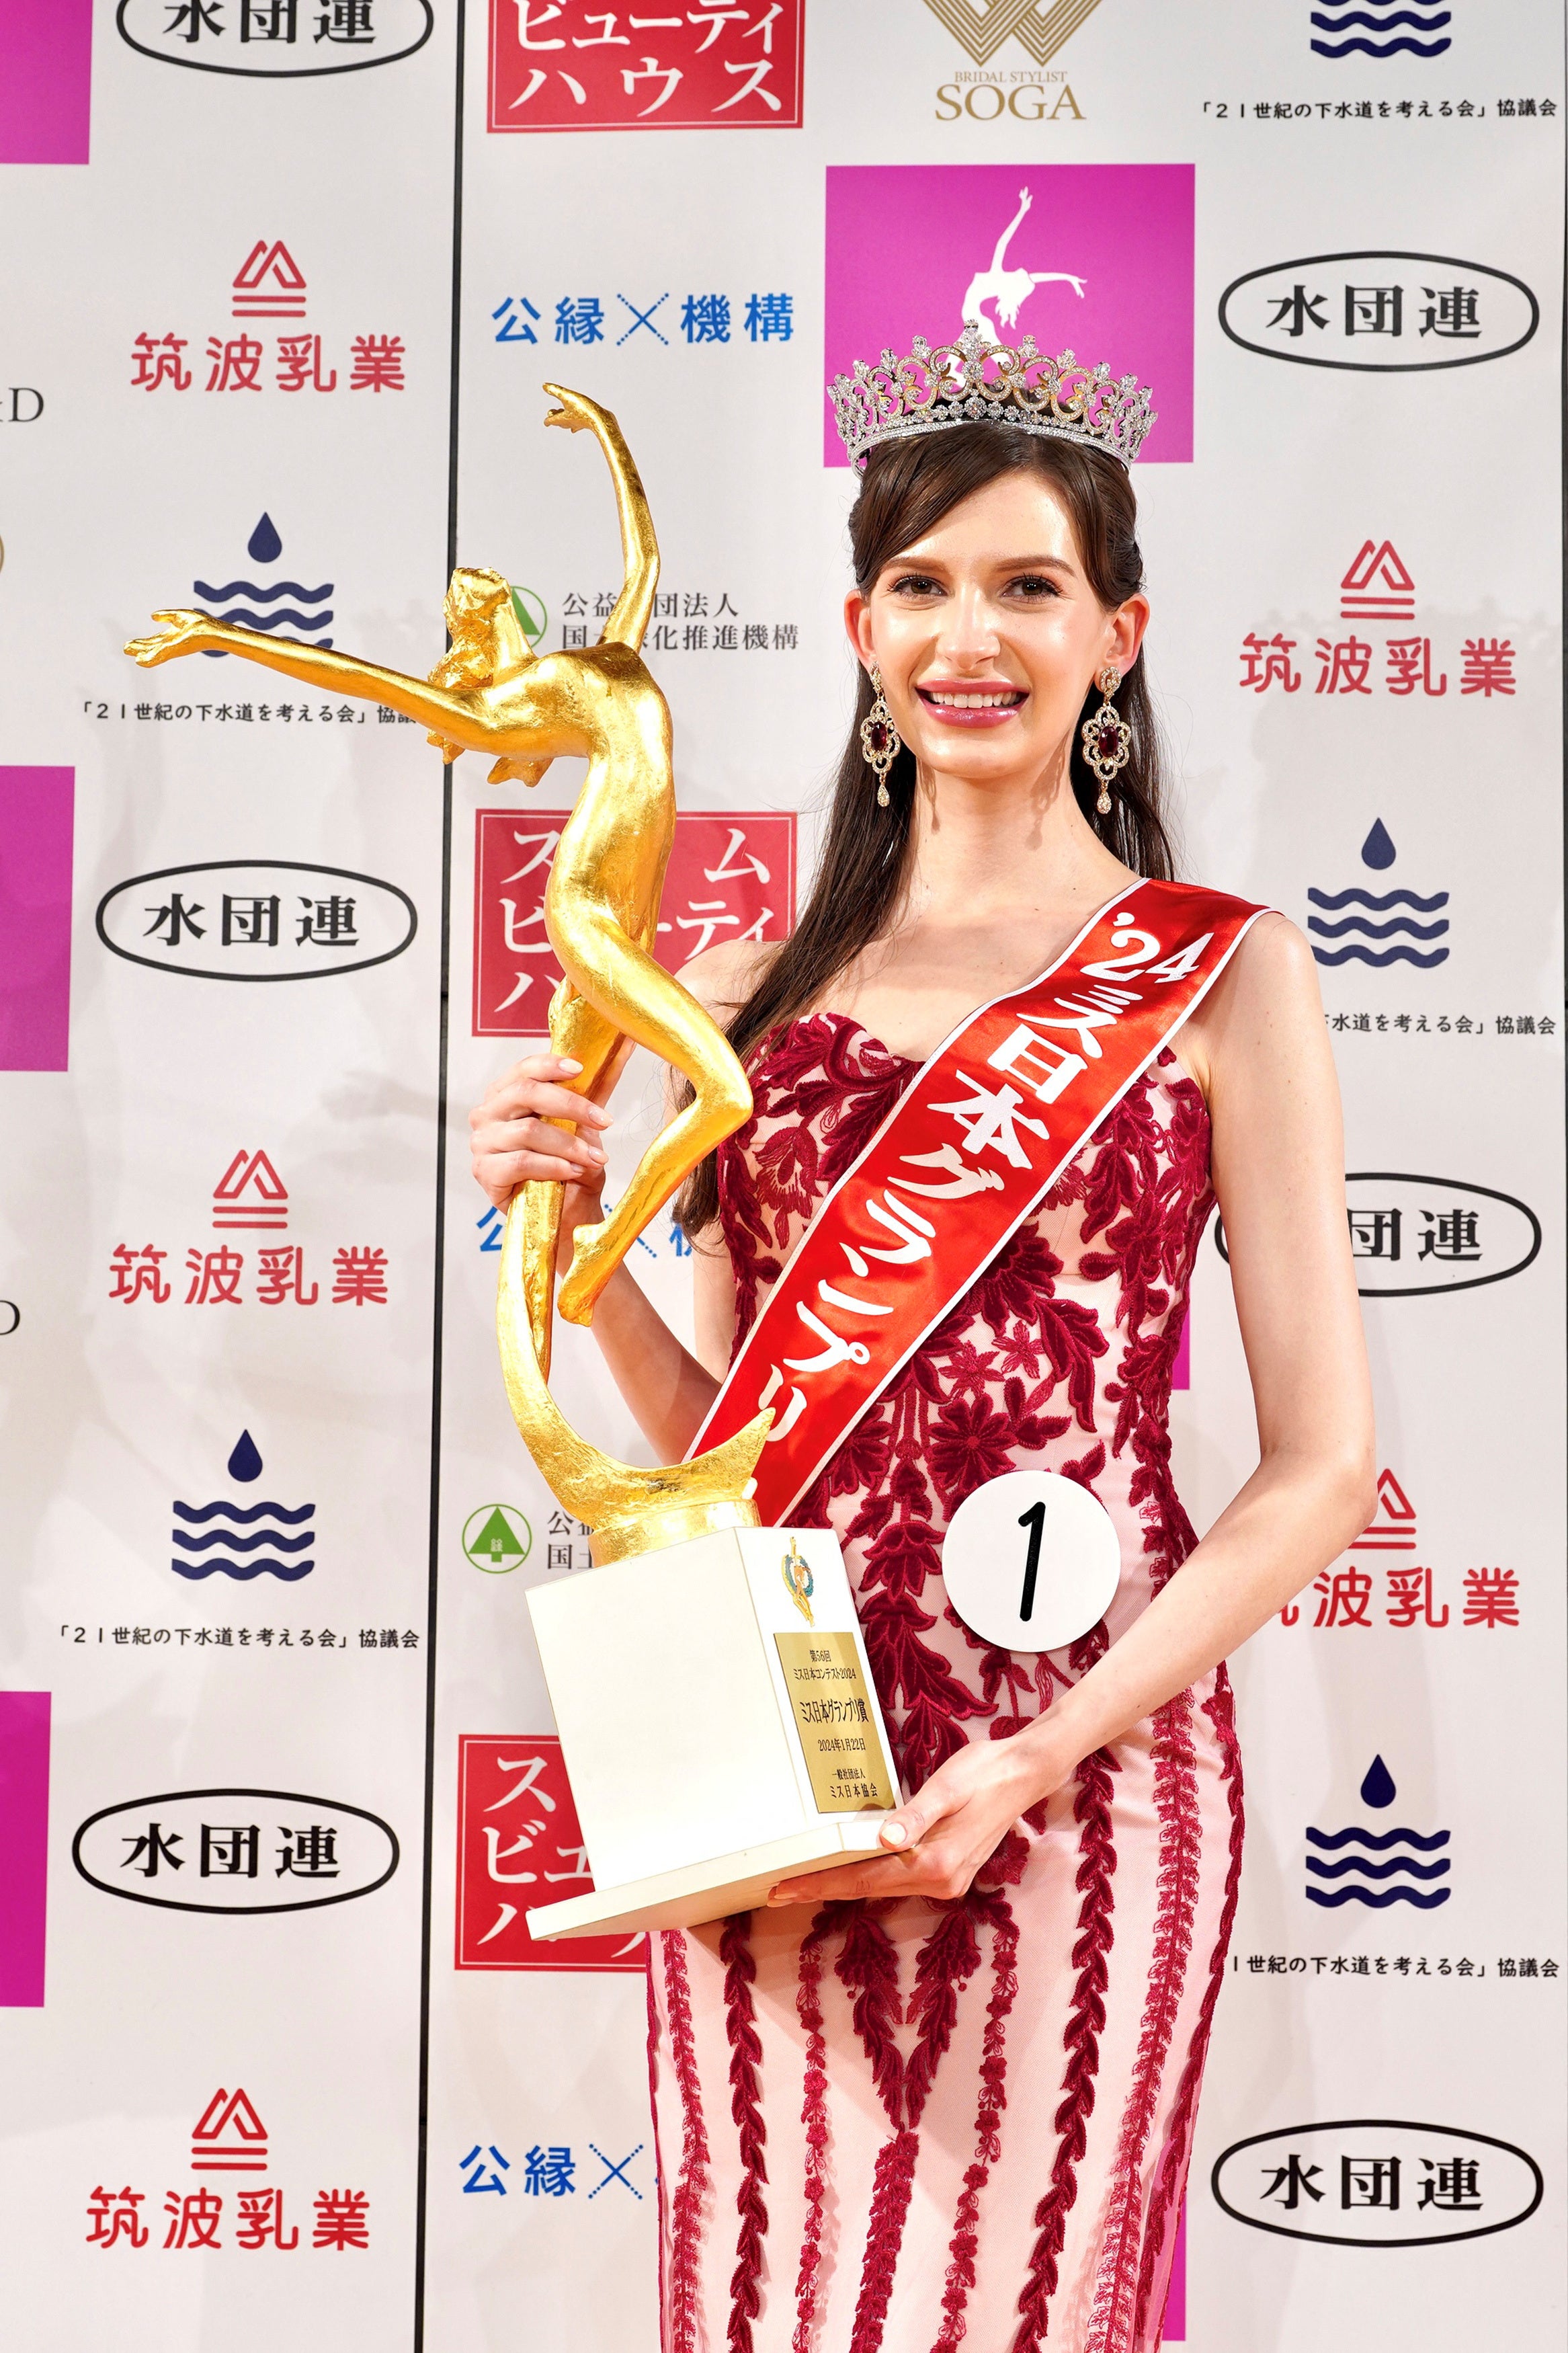 Carolina Shiino sparked debate and outrage when she was crowned Miss Japan